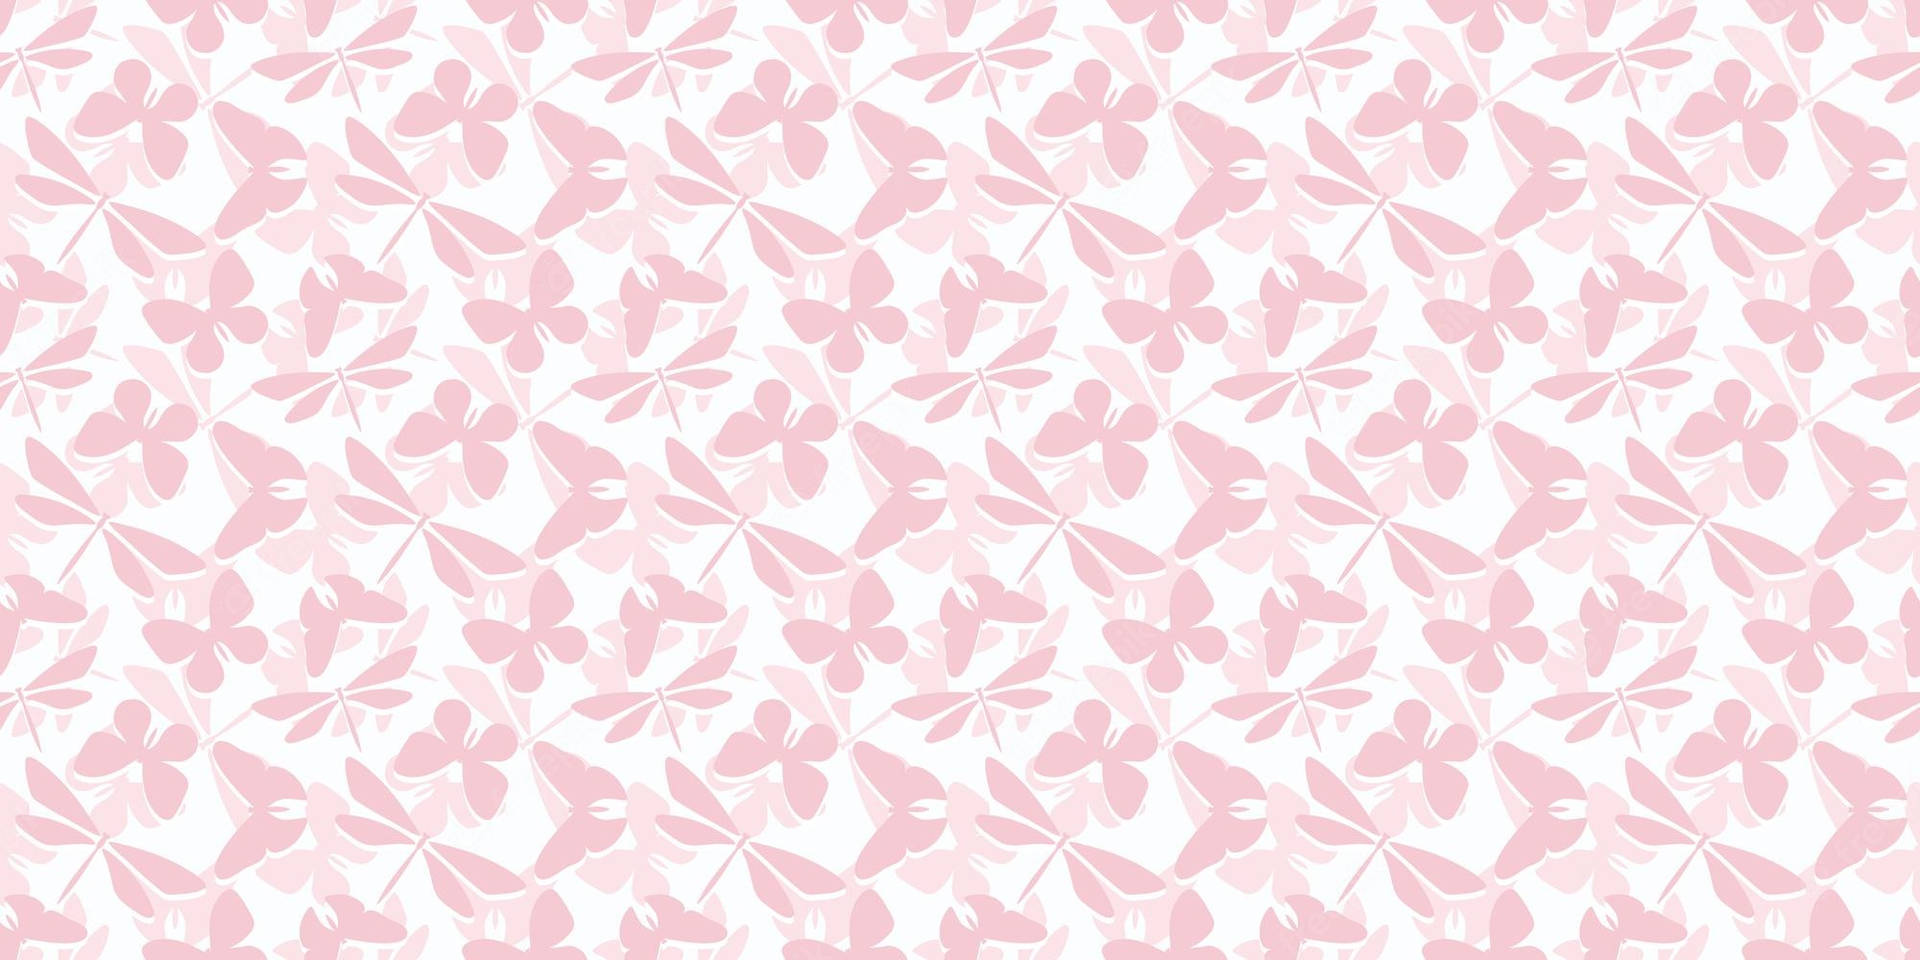 100+] Coquette Backgrounds